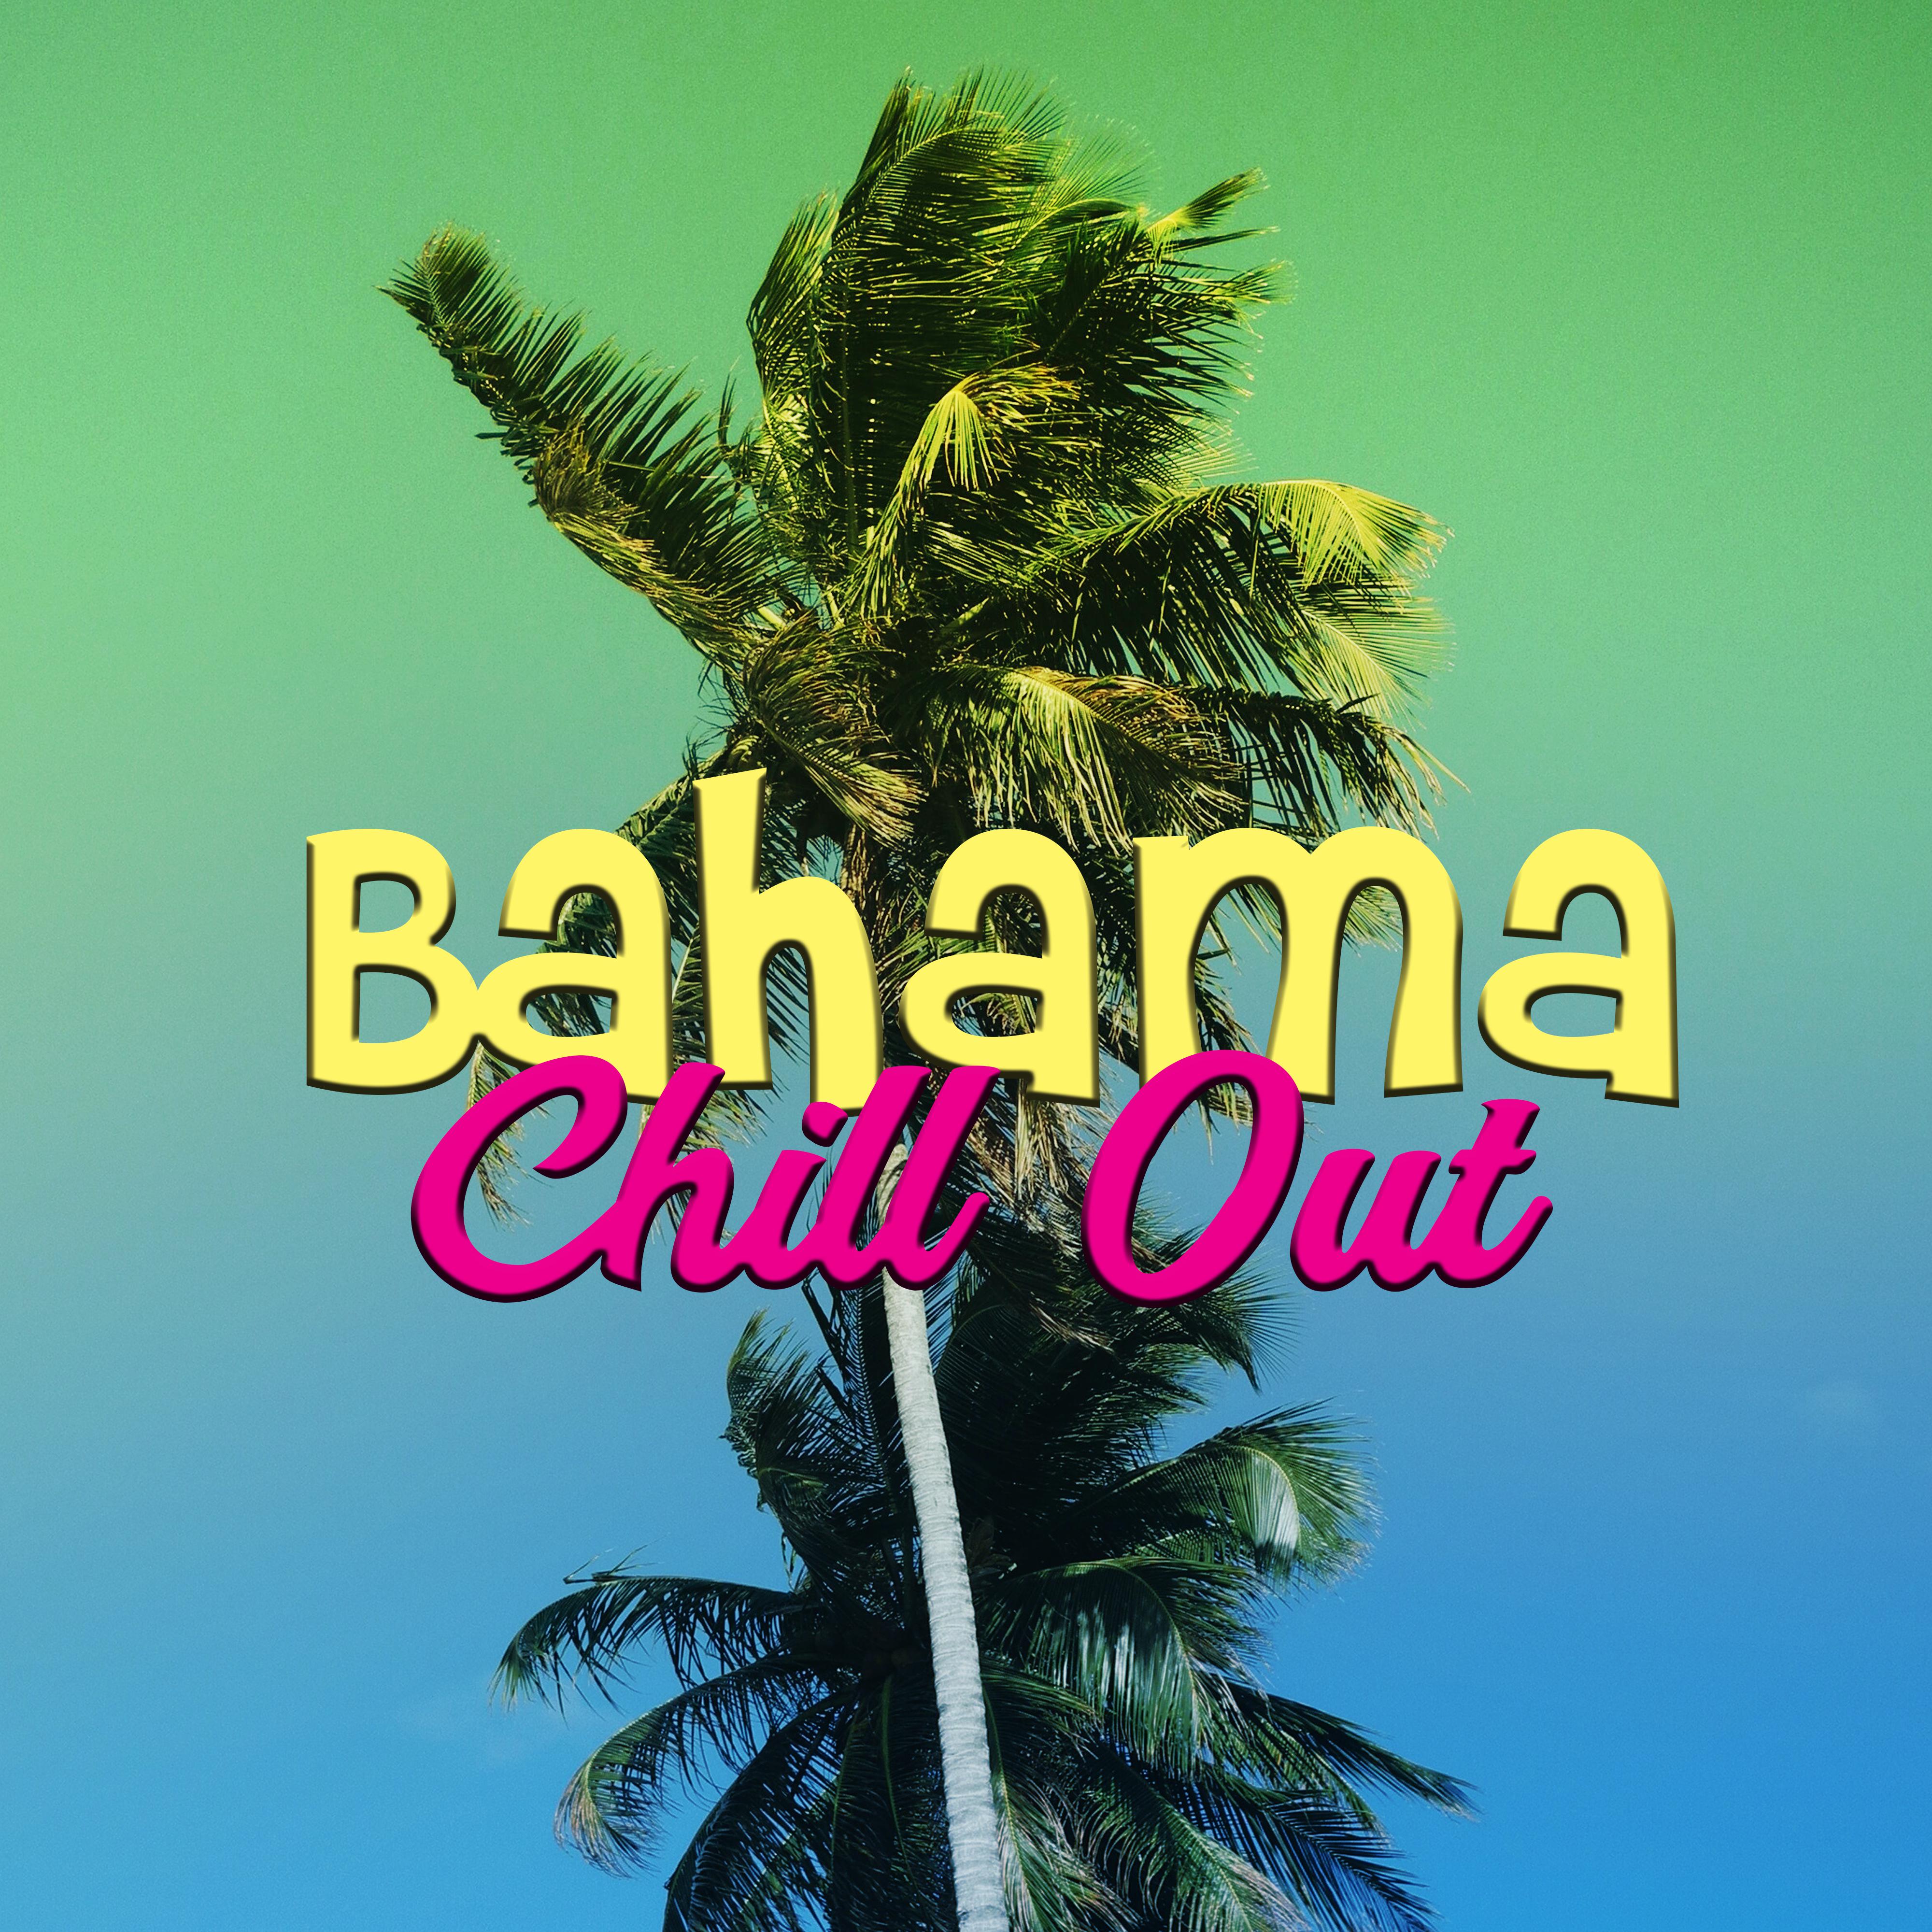 Bahama Chill Out  Summer Island Music, Chilled Waves, Holiday Relaxation, Chill Out Sounds for Tropical Island